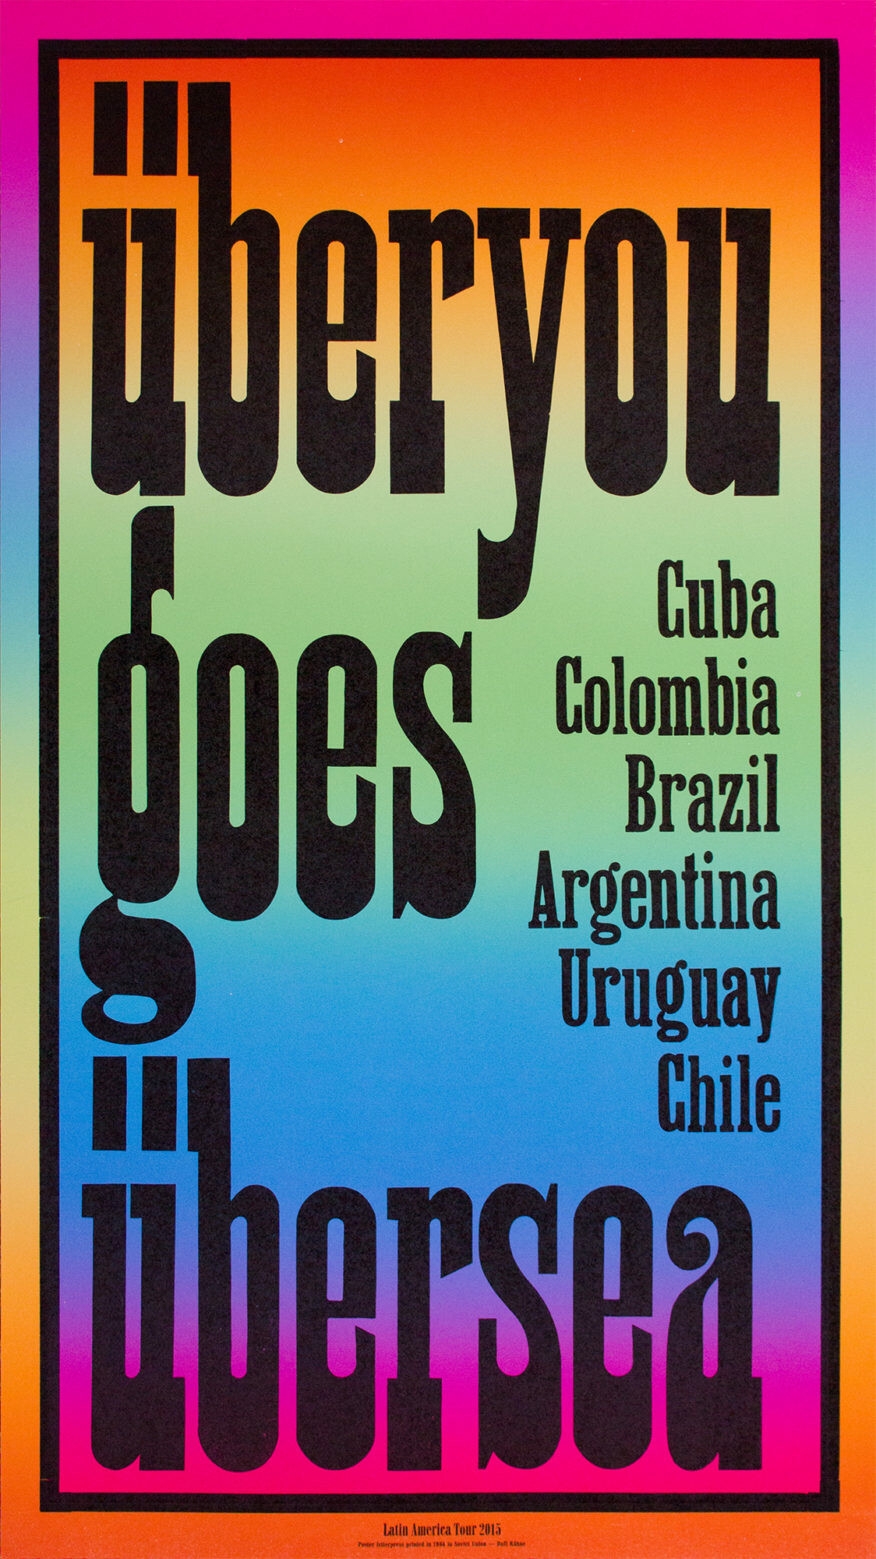 TDC Explores Latin American Typography With “Cha Che Chi” Conference - The  Type Directors Club